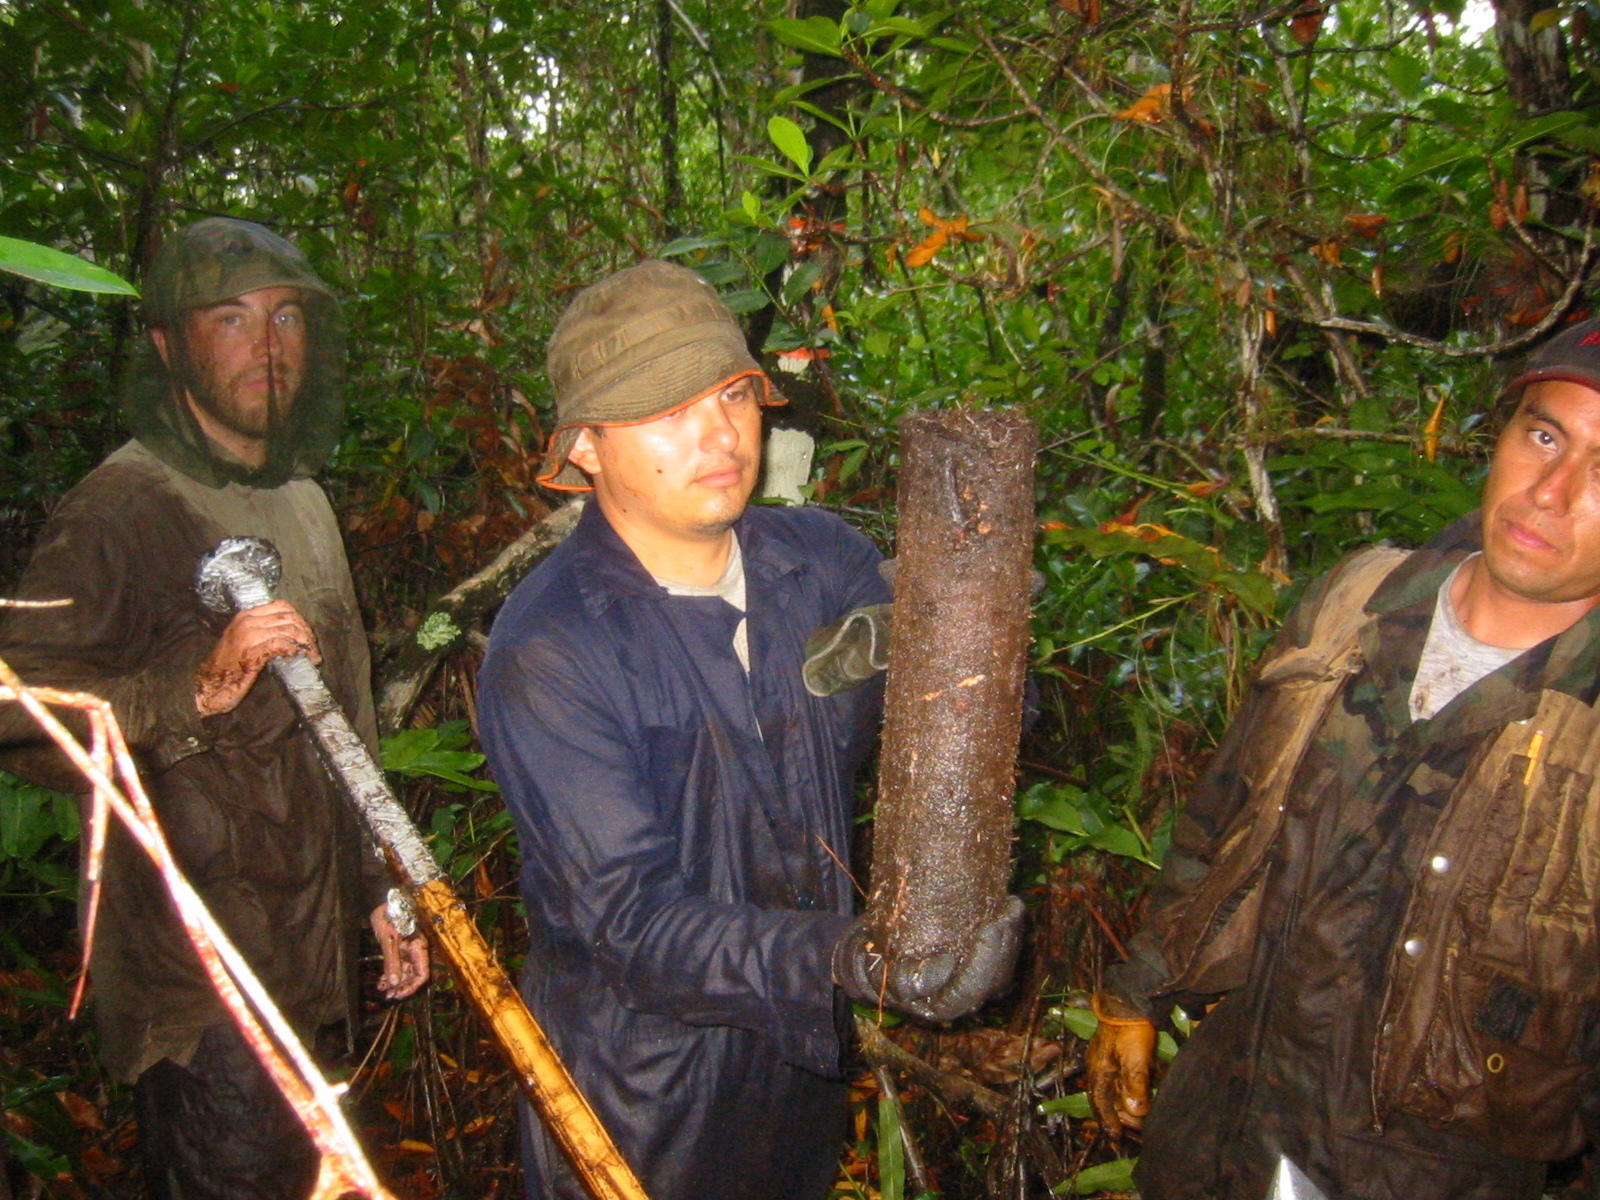 Left to right: Justin Baker, Arturo Saldivar, Edward Castaneda. Pulling core to determine standing crop (fine root biomass) in mangrove forest at SRS-4 in Shark River Slough